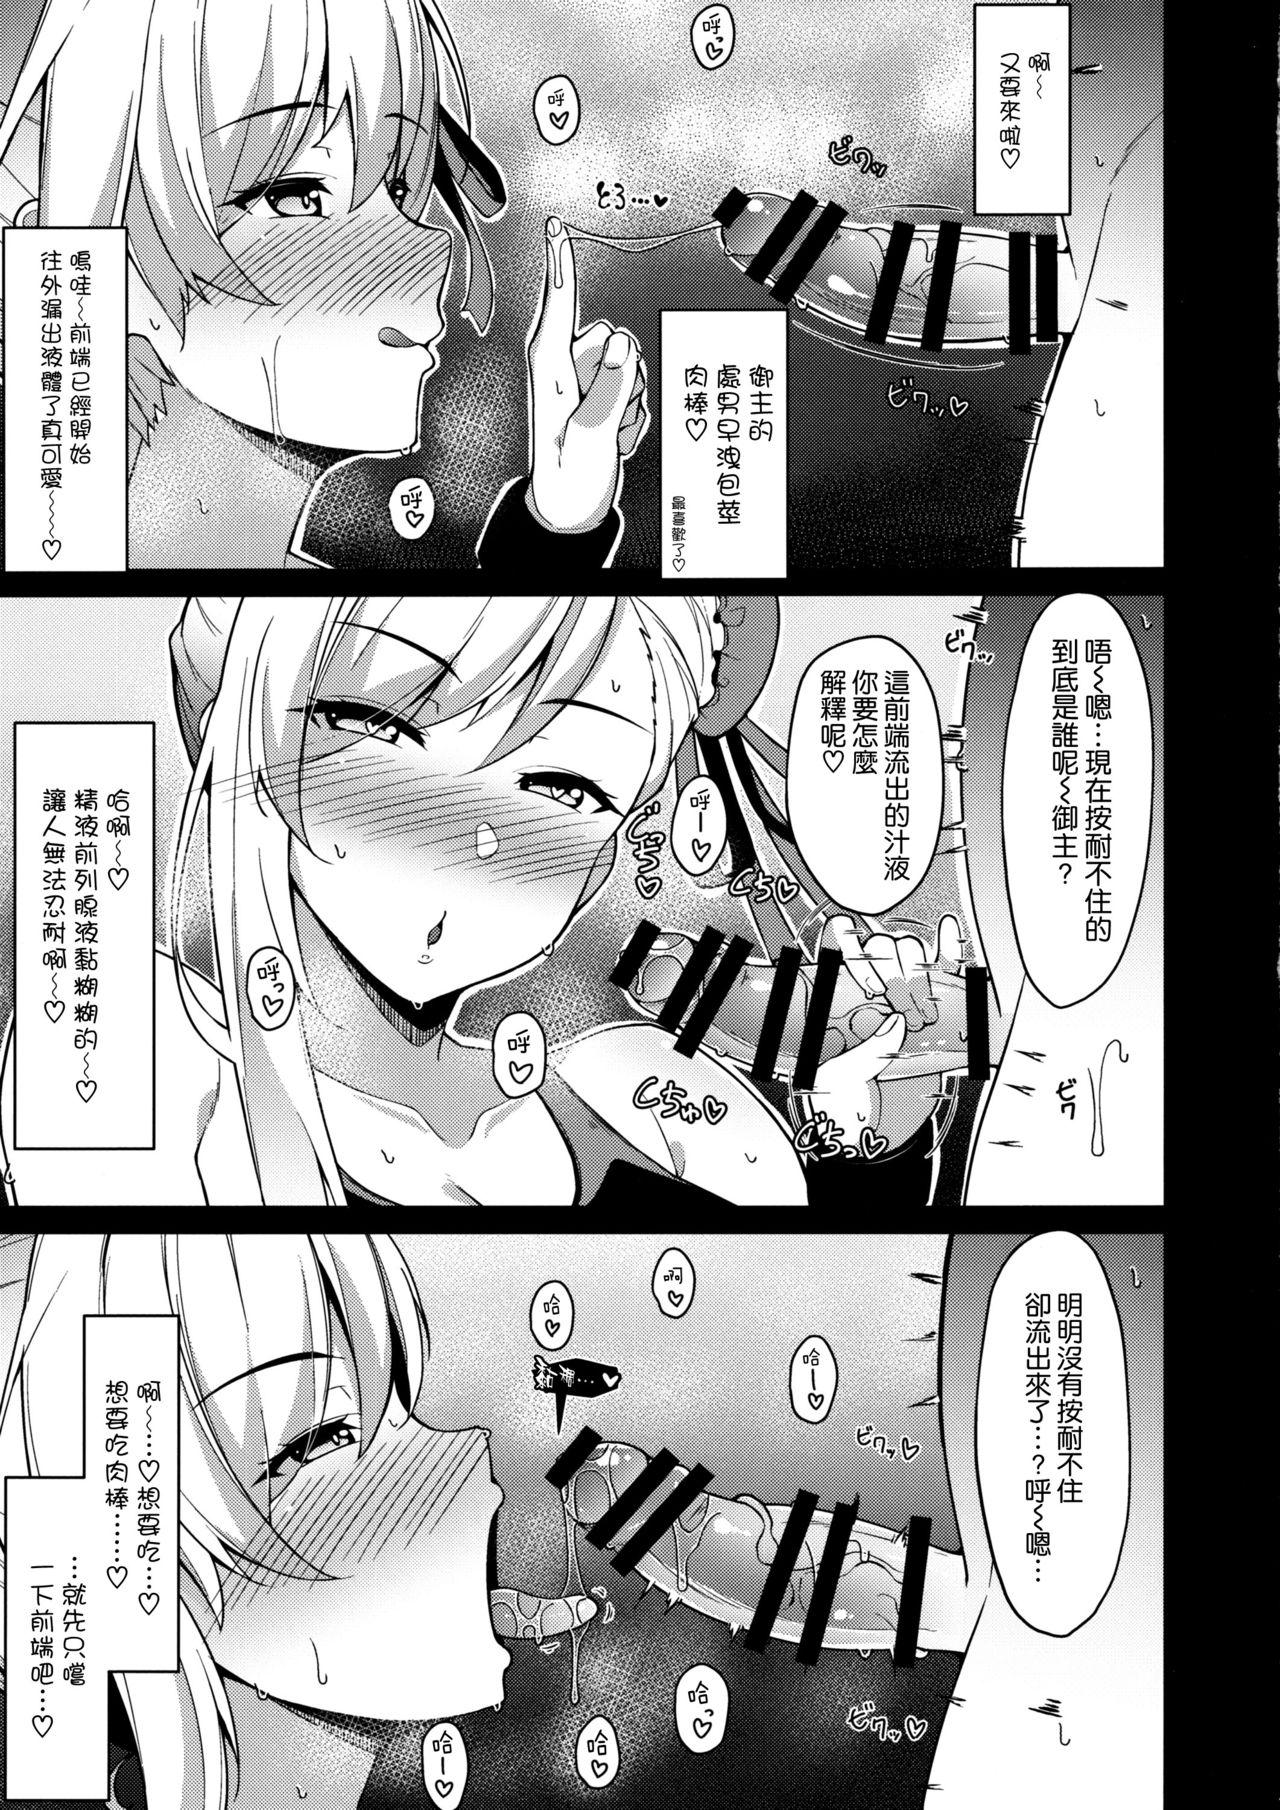 Skinny (C97) [Cow Lipid (Fuurai)] U-D-N-S (Fate/Grand Order) [Chinese] [空気系☆漢化] - Fate grand order Doggystyle - Page 7